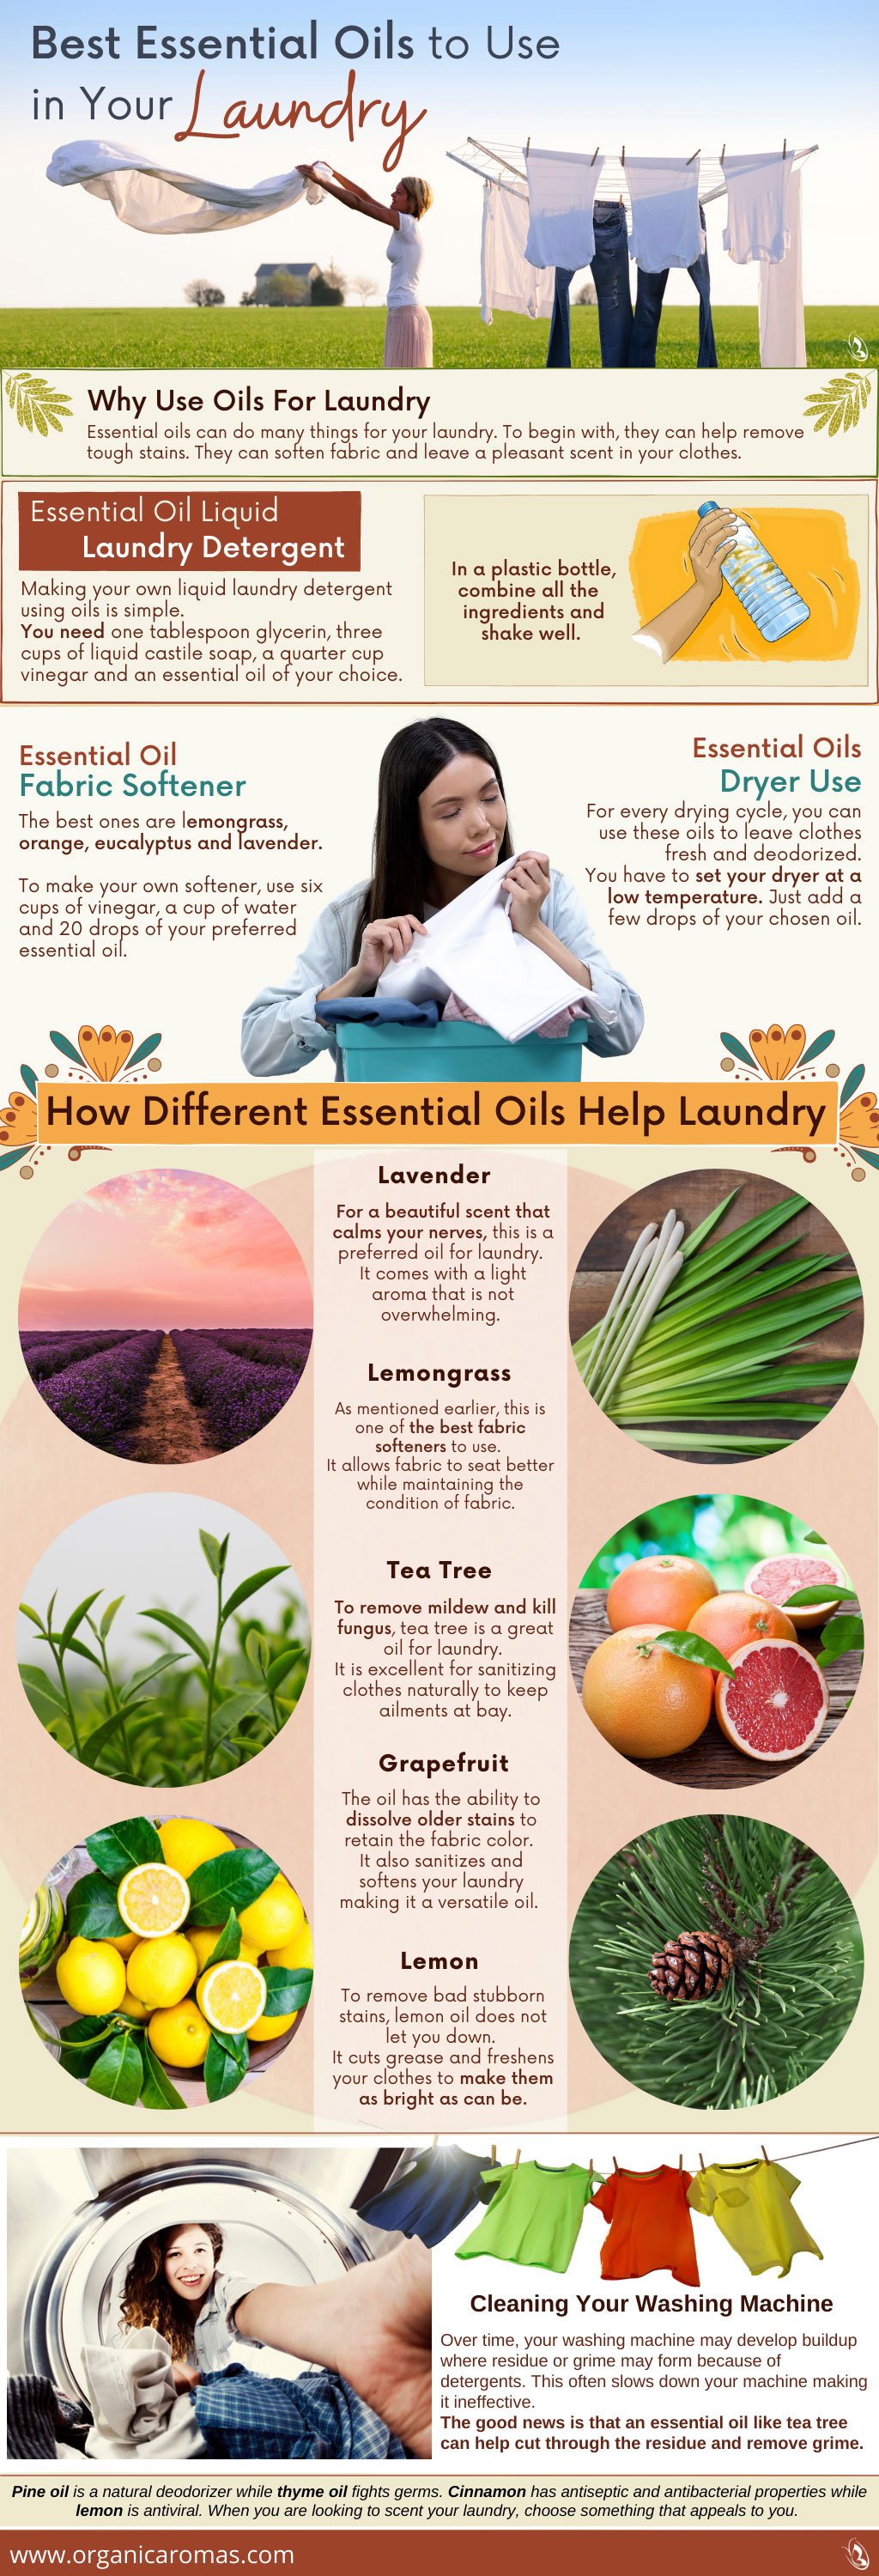 The Best Essential Oil Scent for Laundry